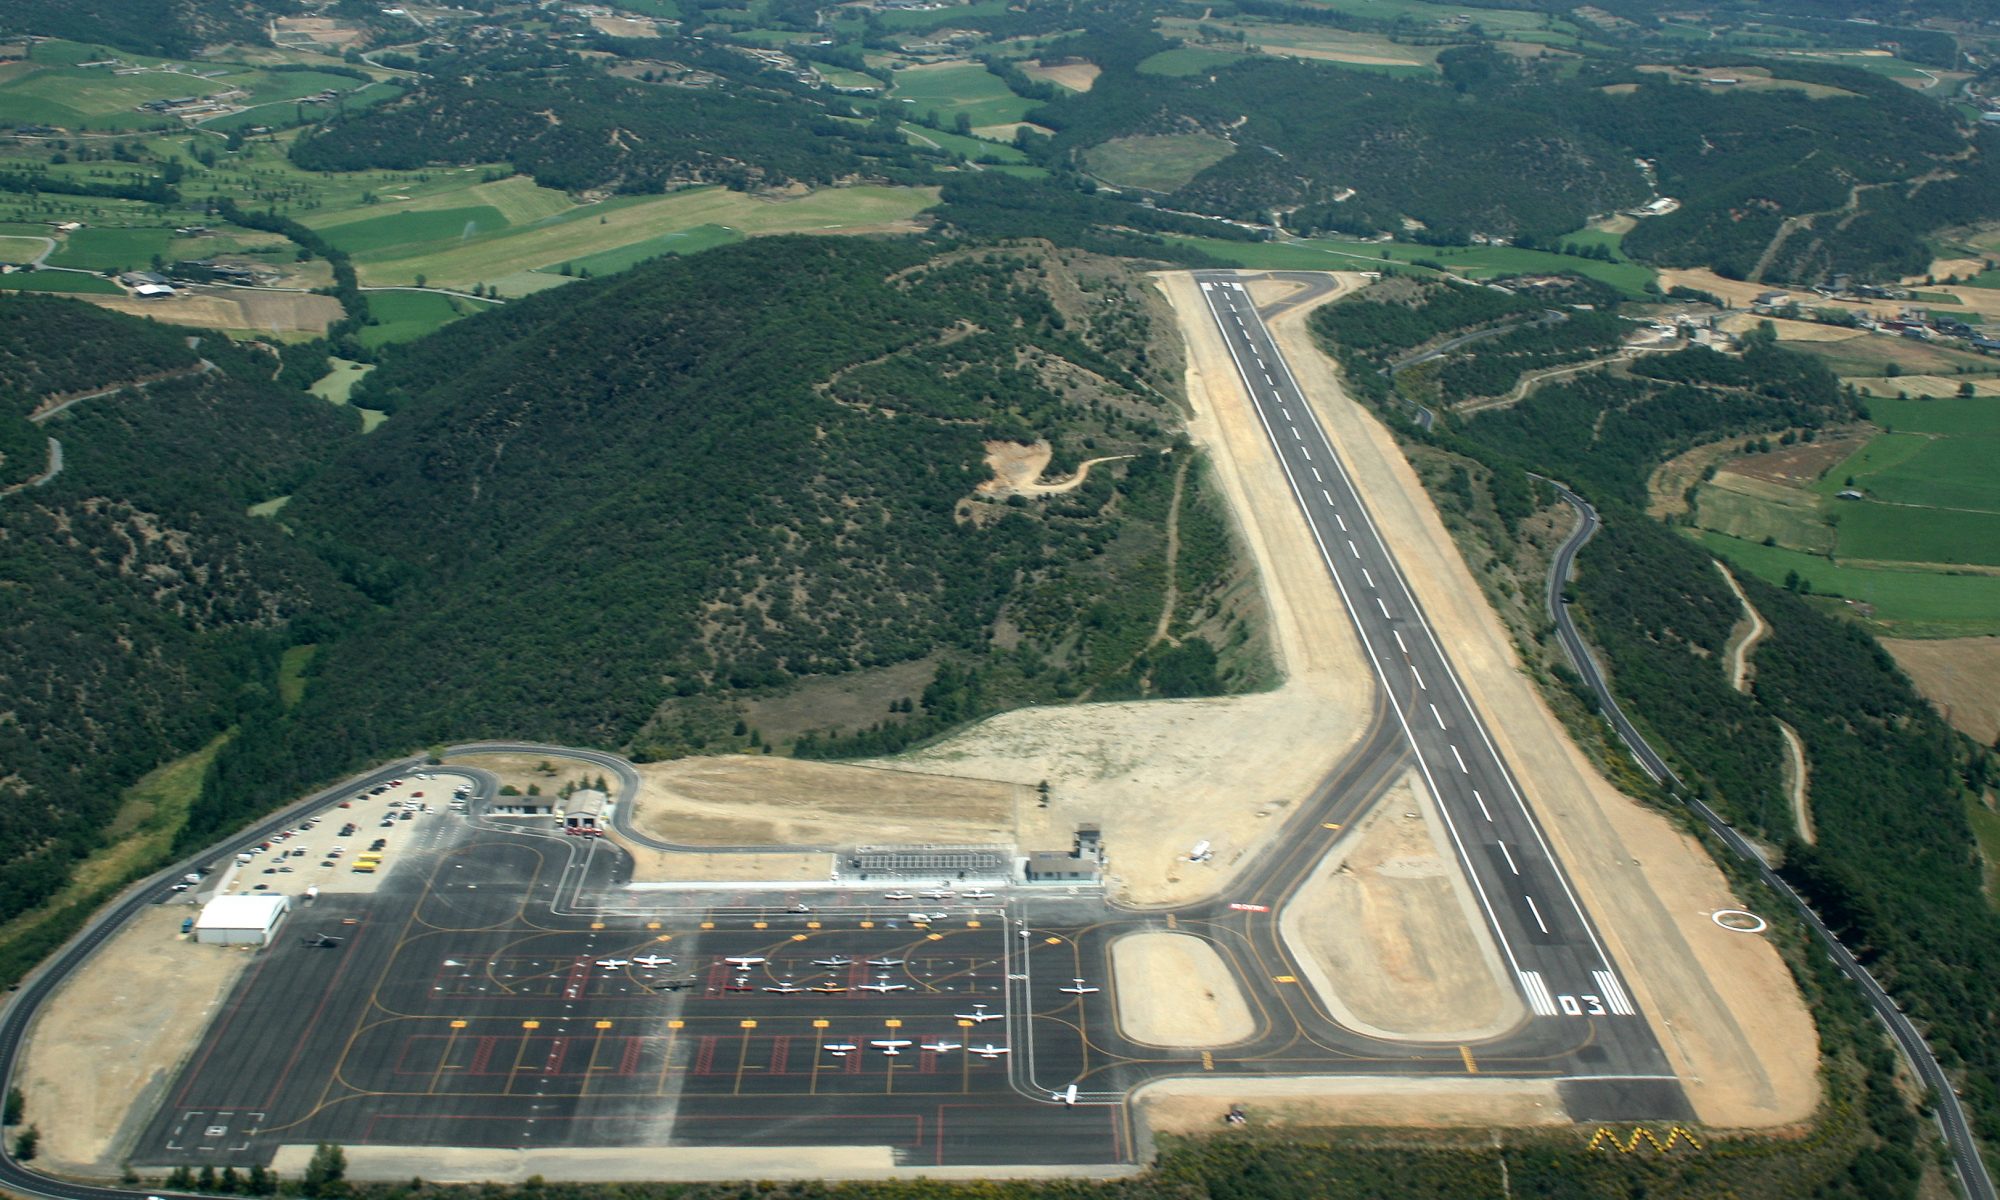 La Seu d'Urgell Airport in Catalunya, outside Andorra serves the Andorran airspace. The EFA claims that the failure of the GPS makes an airport essential in the country